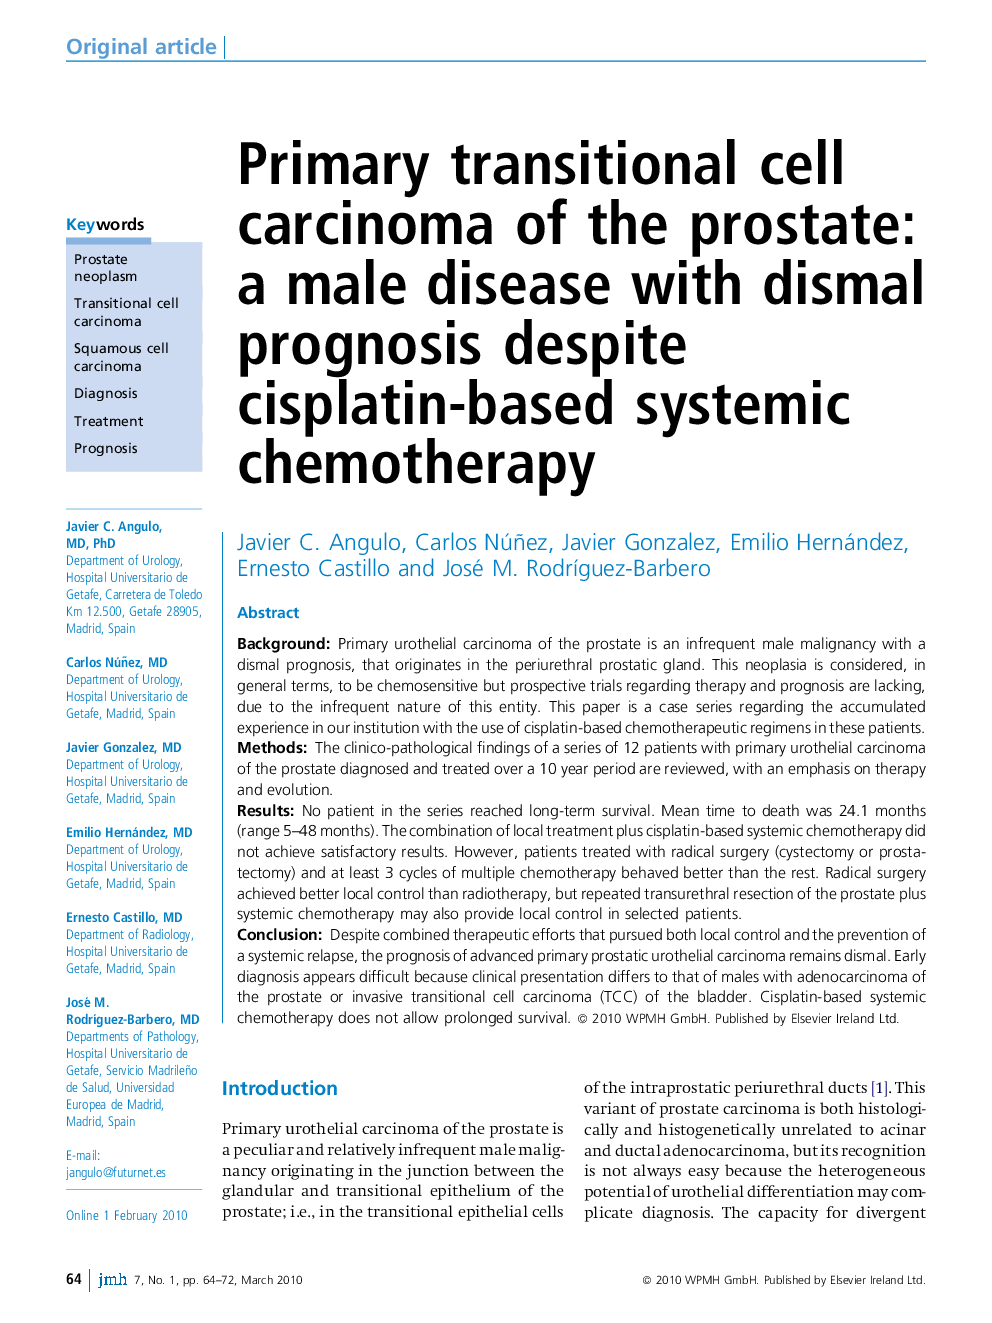 Primary transitional cell carcinoma of the prostate: a male disease with dismal prognosis despite cisplatin-based systemic chemotherapy